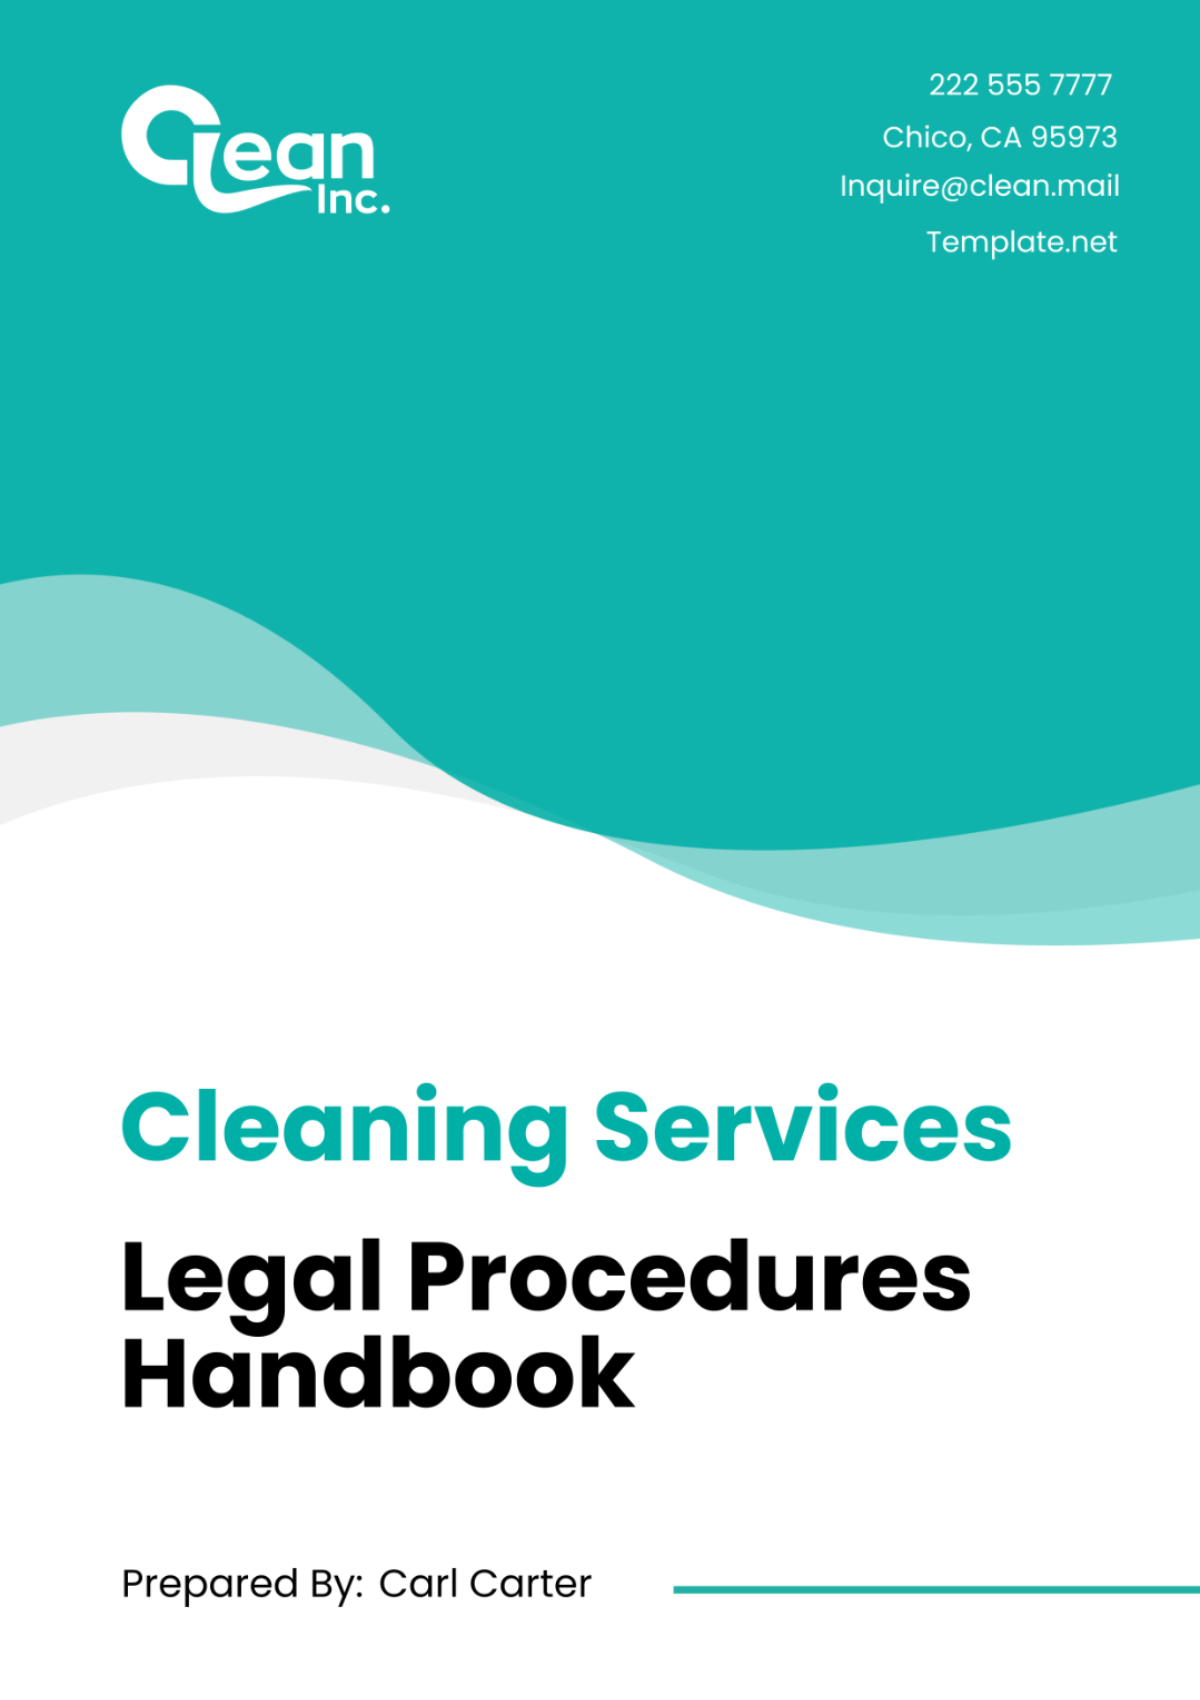 Free Cleaning Services Legal Procedures Handbook Template